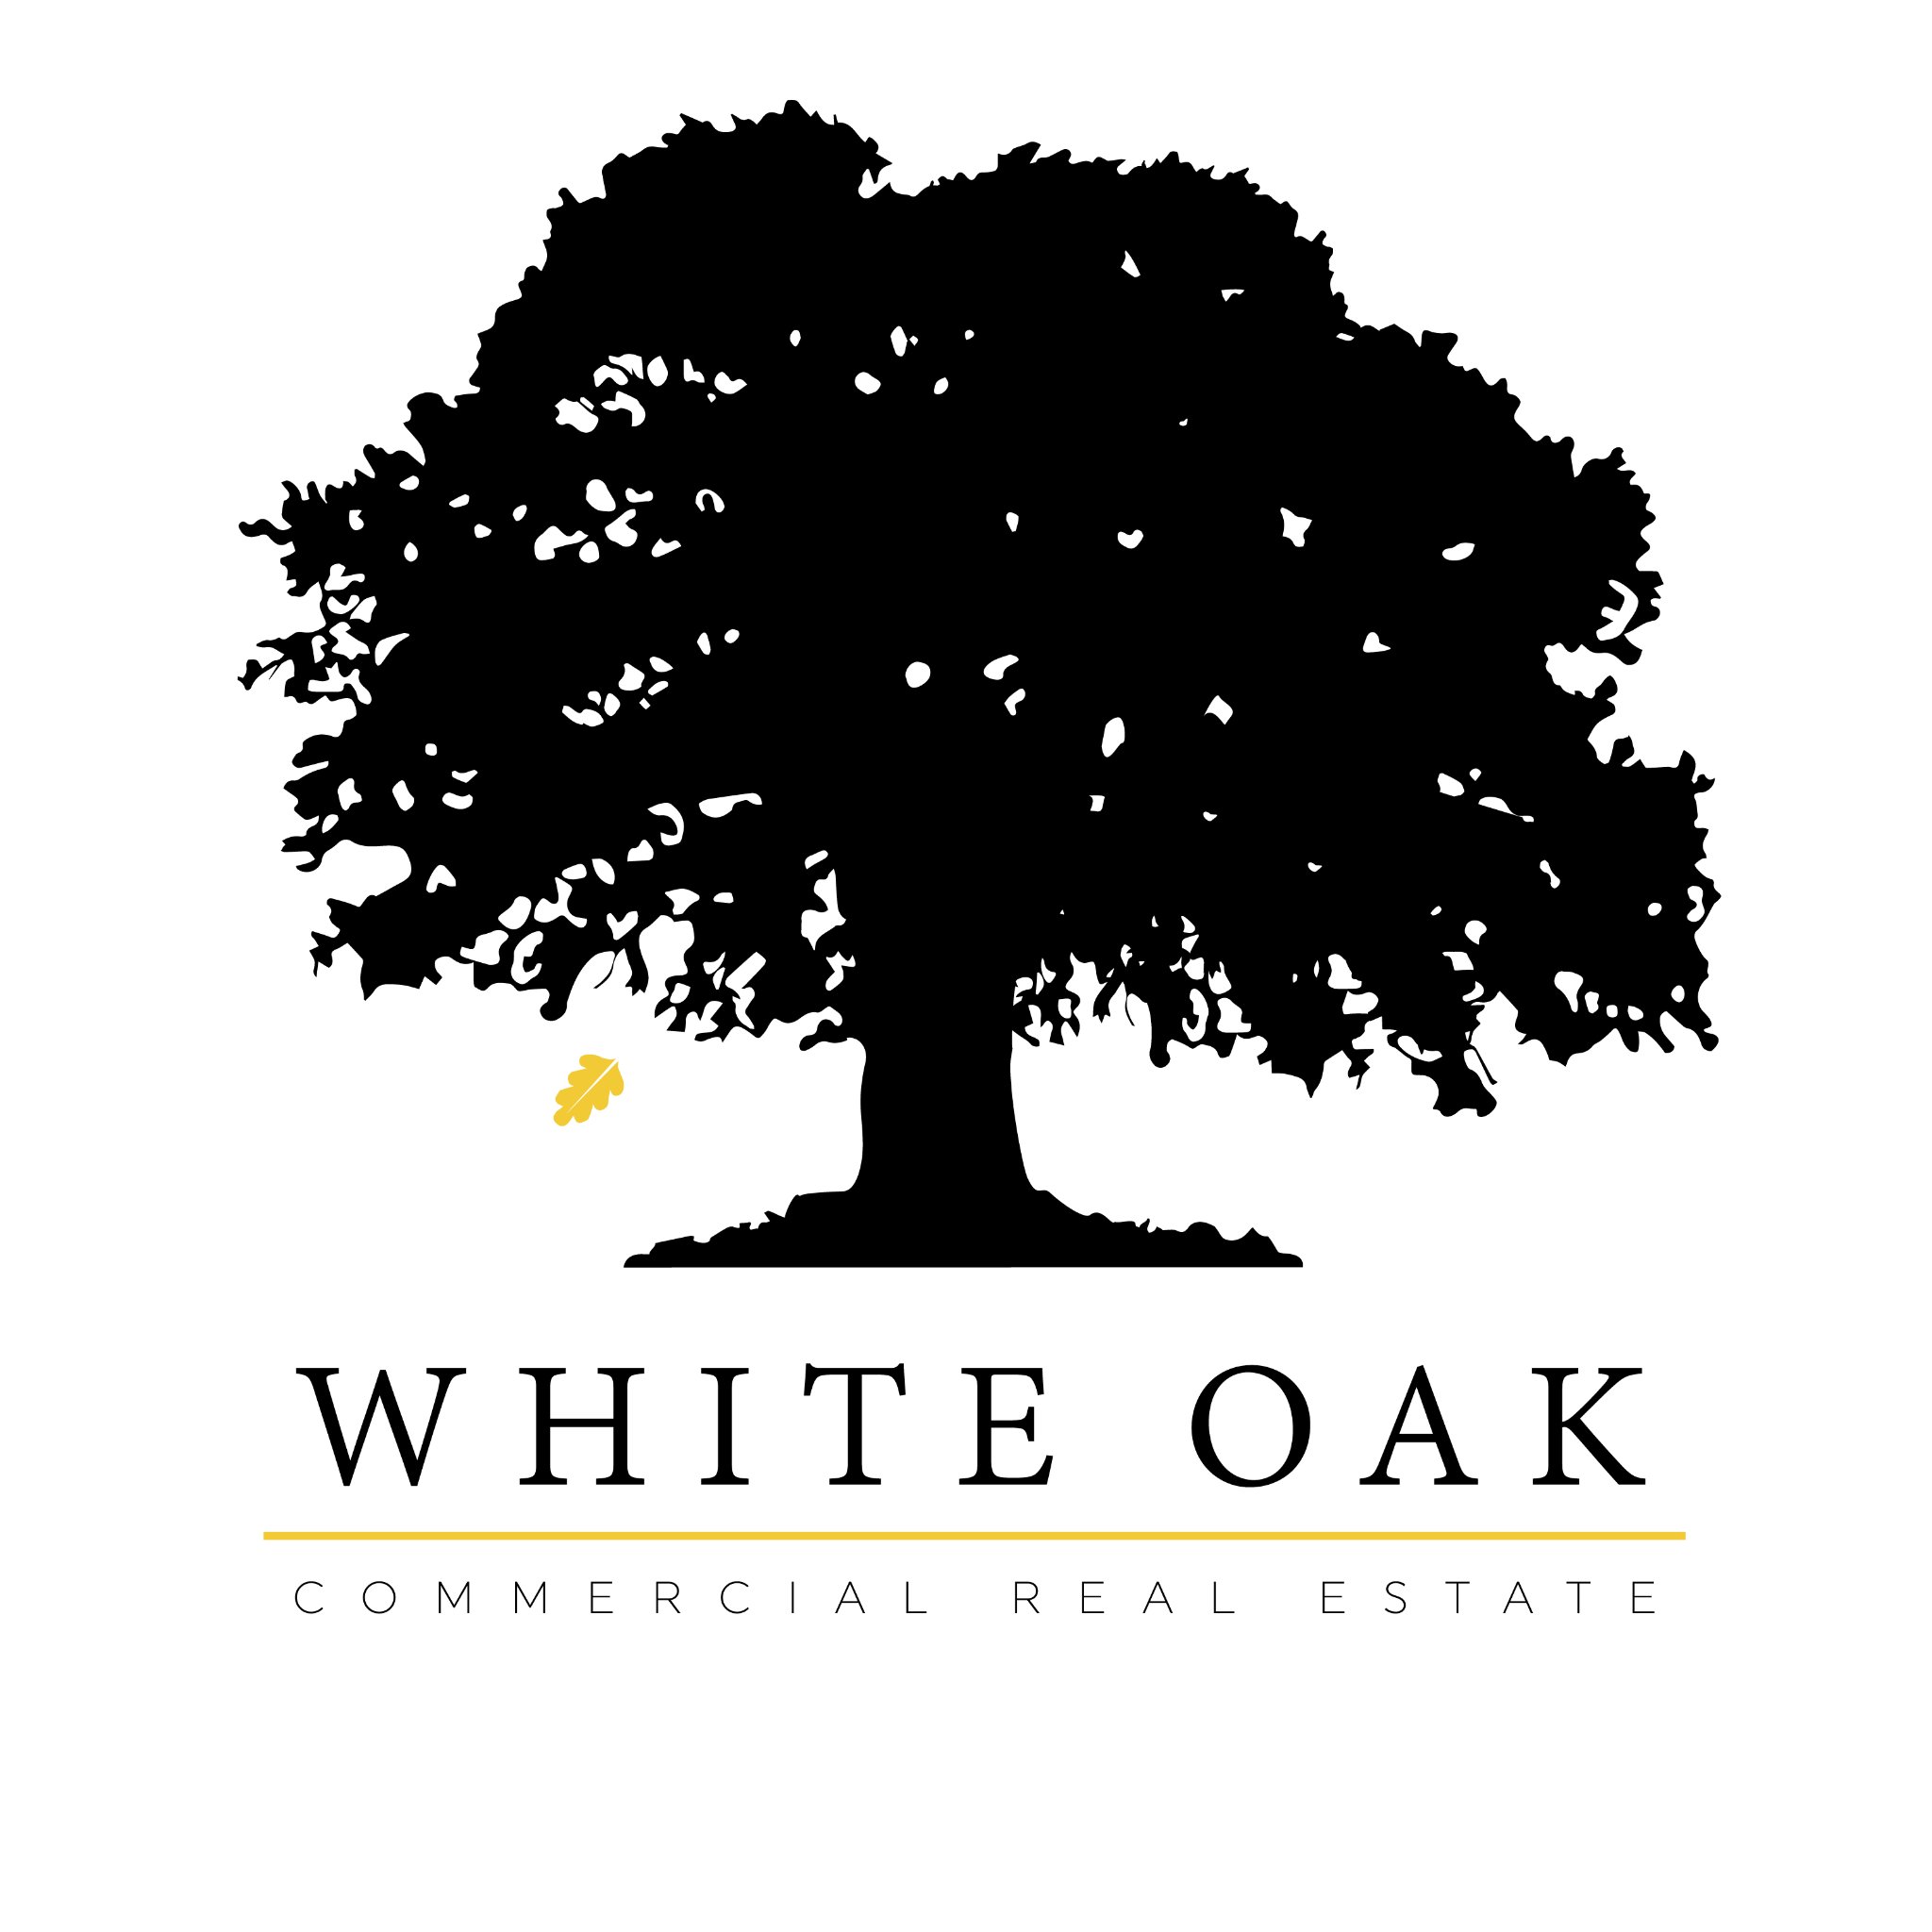 At White Oak Commercial Real Estate, we offer a unique advantage by combing the passion of an entrepreneurial company with decades of experience. #whiteoakcre